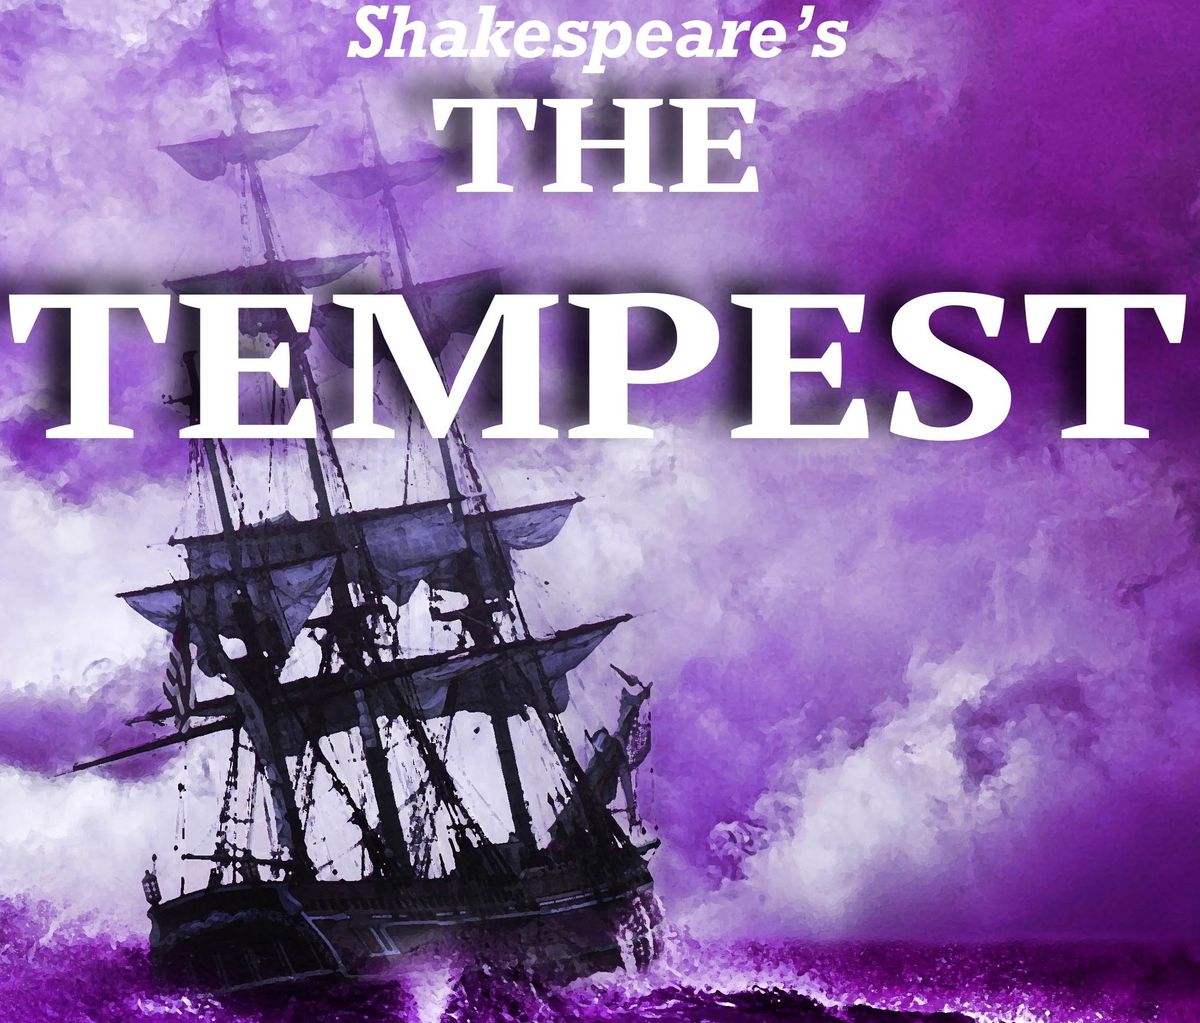 Open Air Theatre: The Festival Players present 'The Tempest' at Hartland Abbey